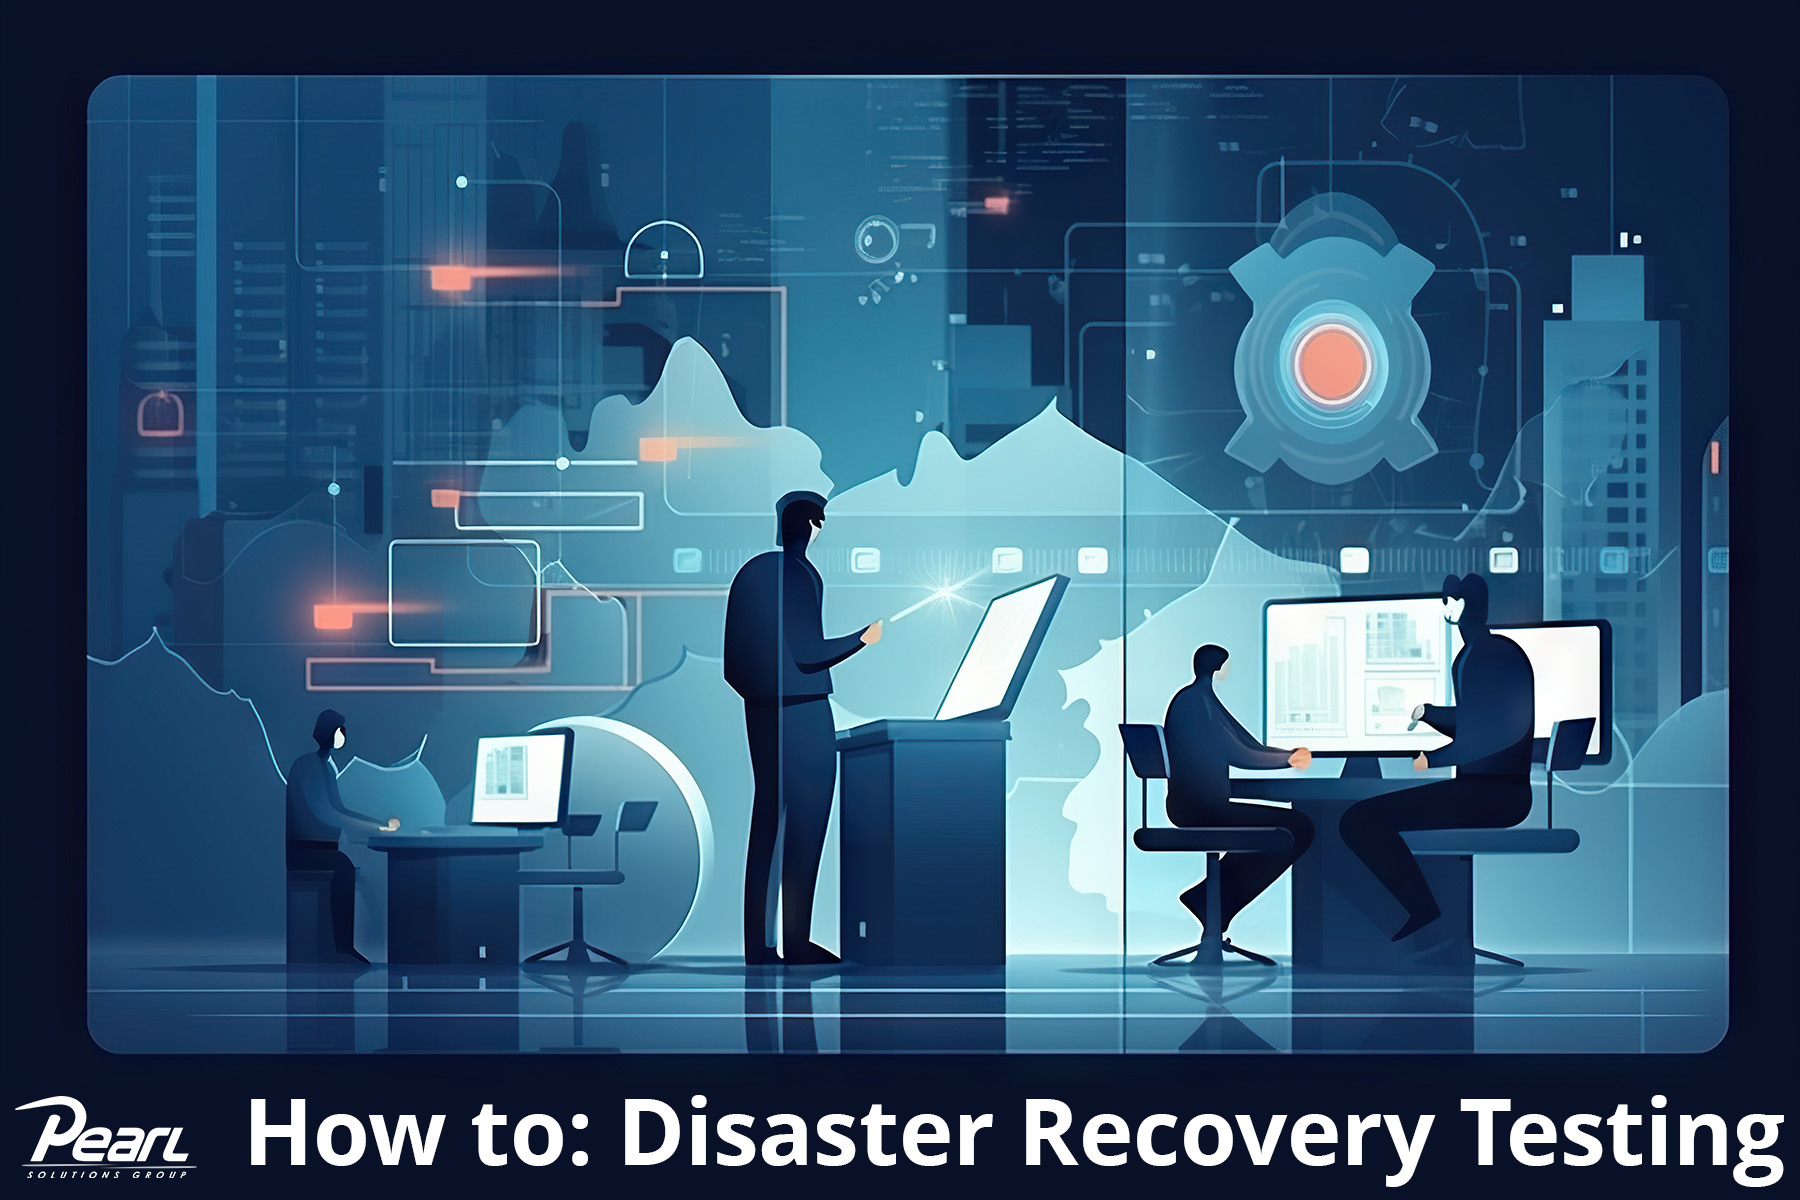 How to do Disaster Recovery Testing